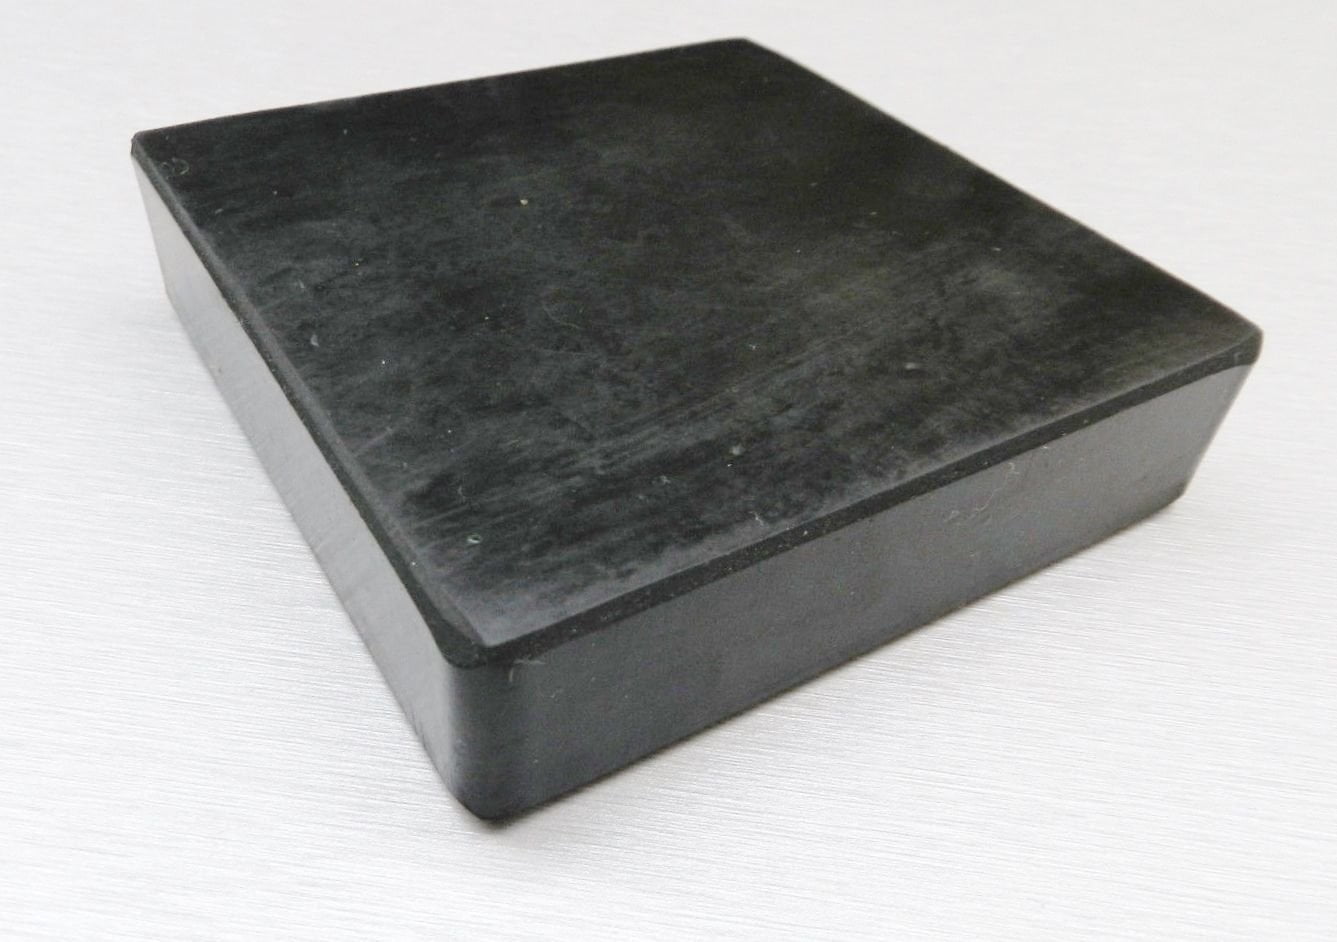 JEWELERS BENCH BLOCK RUBBER 4" x 4" SQUARE 1" THICK BASE FOR STEEL